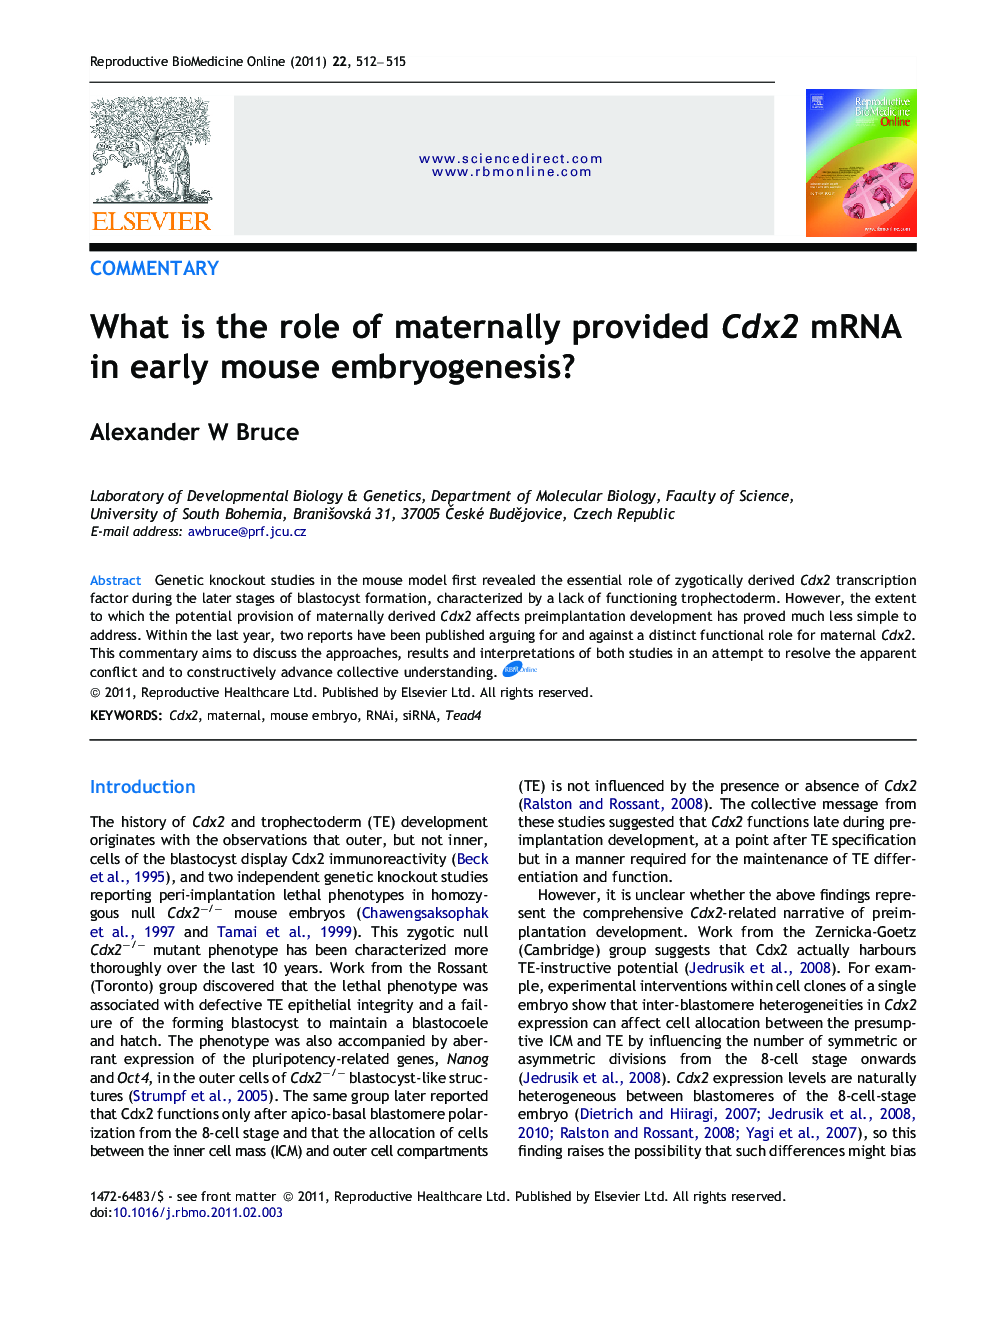 What is the role of maternally provided Cdx2 mRNA in early mouse embryogenesis?